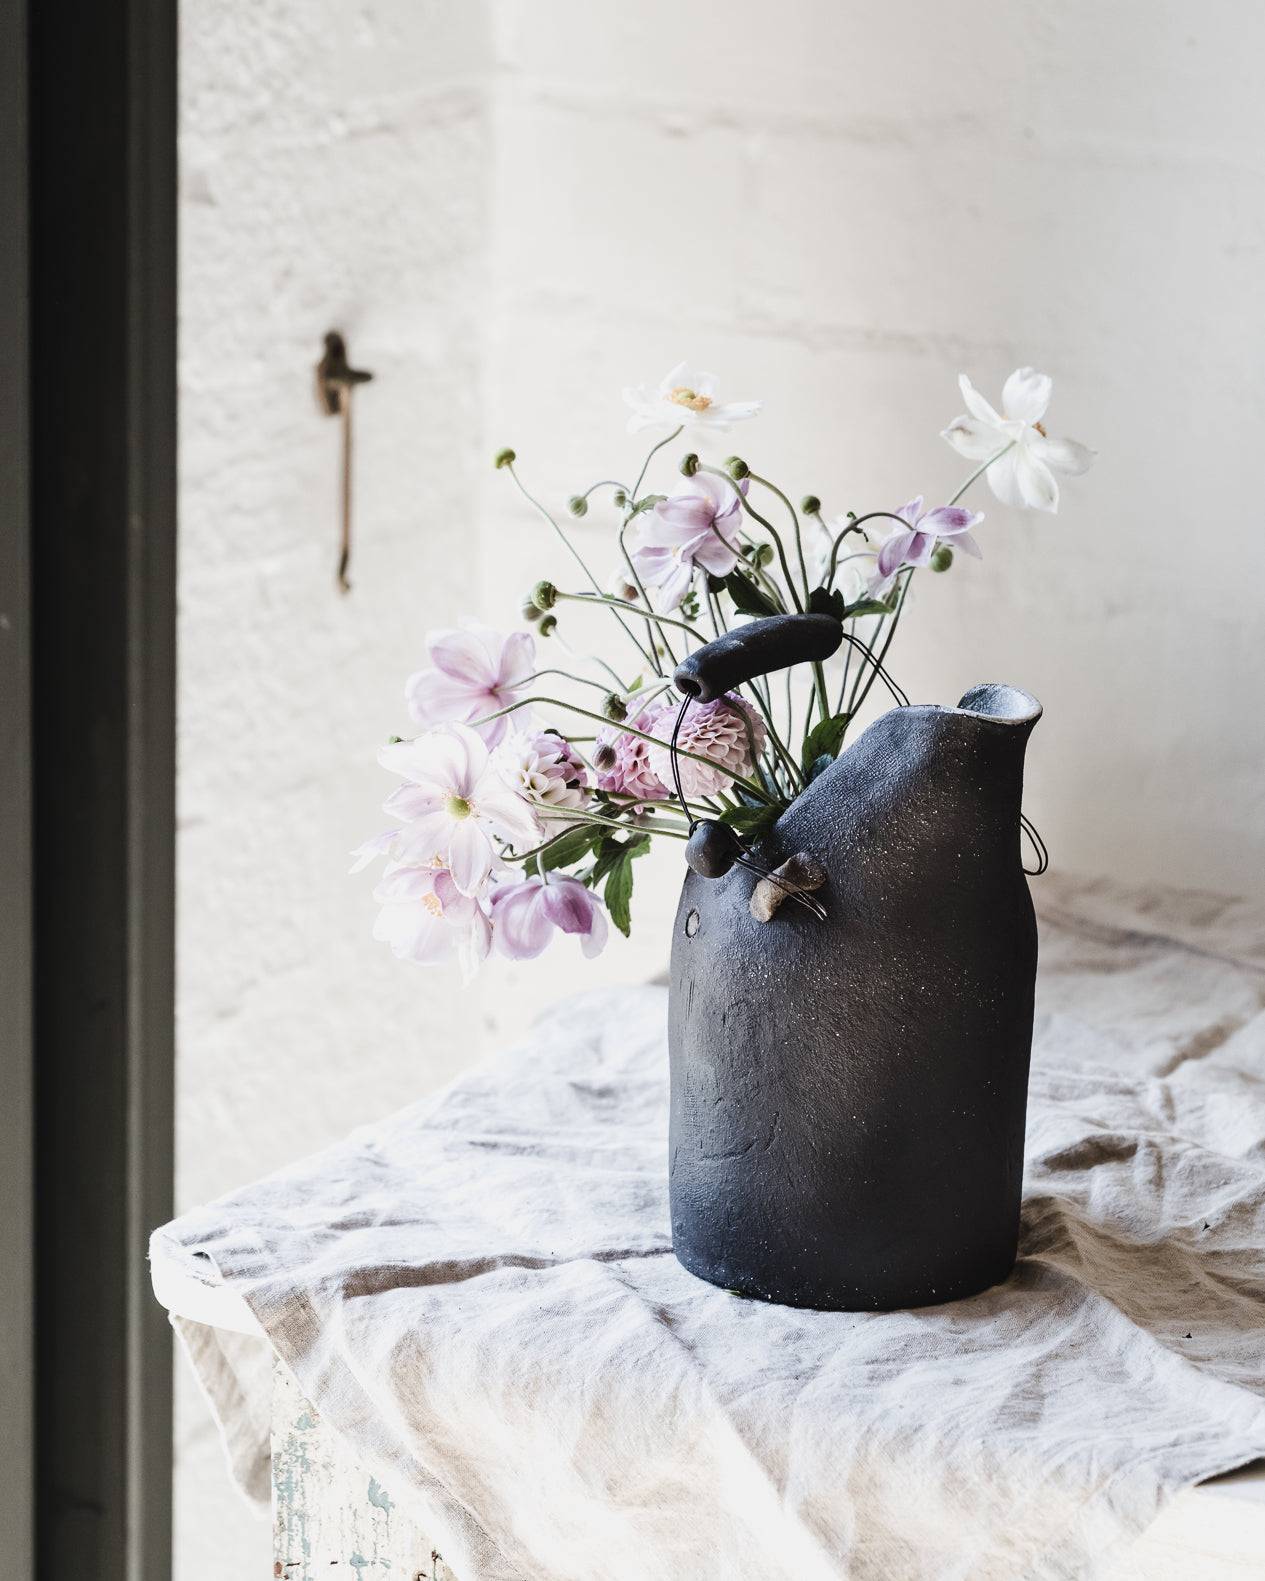 Black rustic jug with wire ceramic handle handmade by clay beehive ceramics